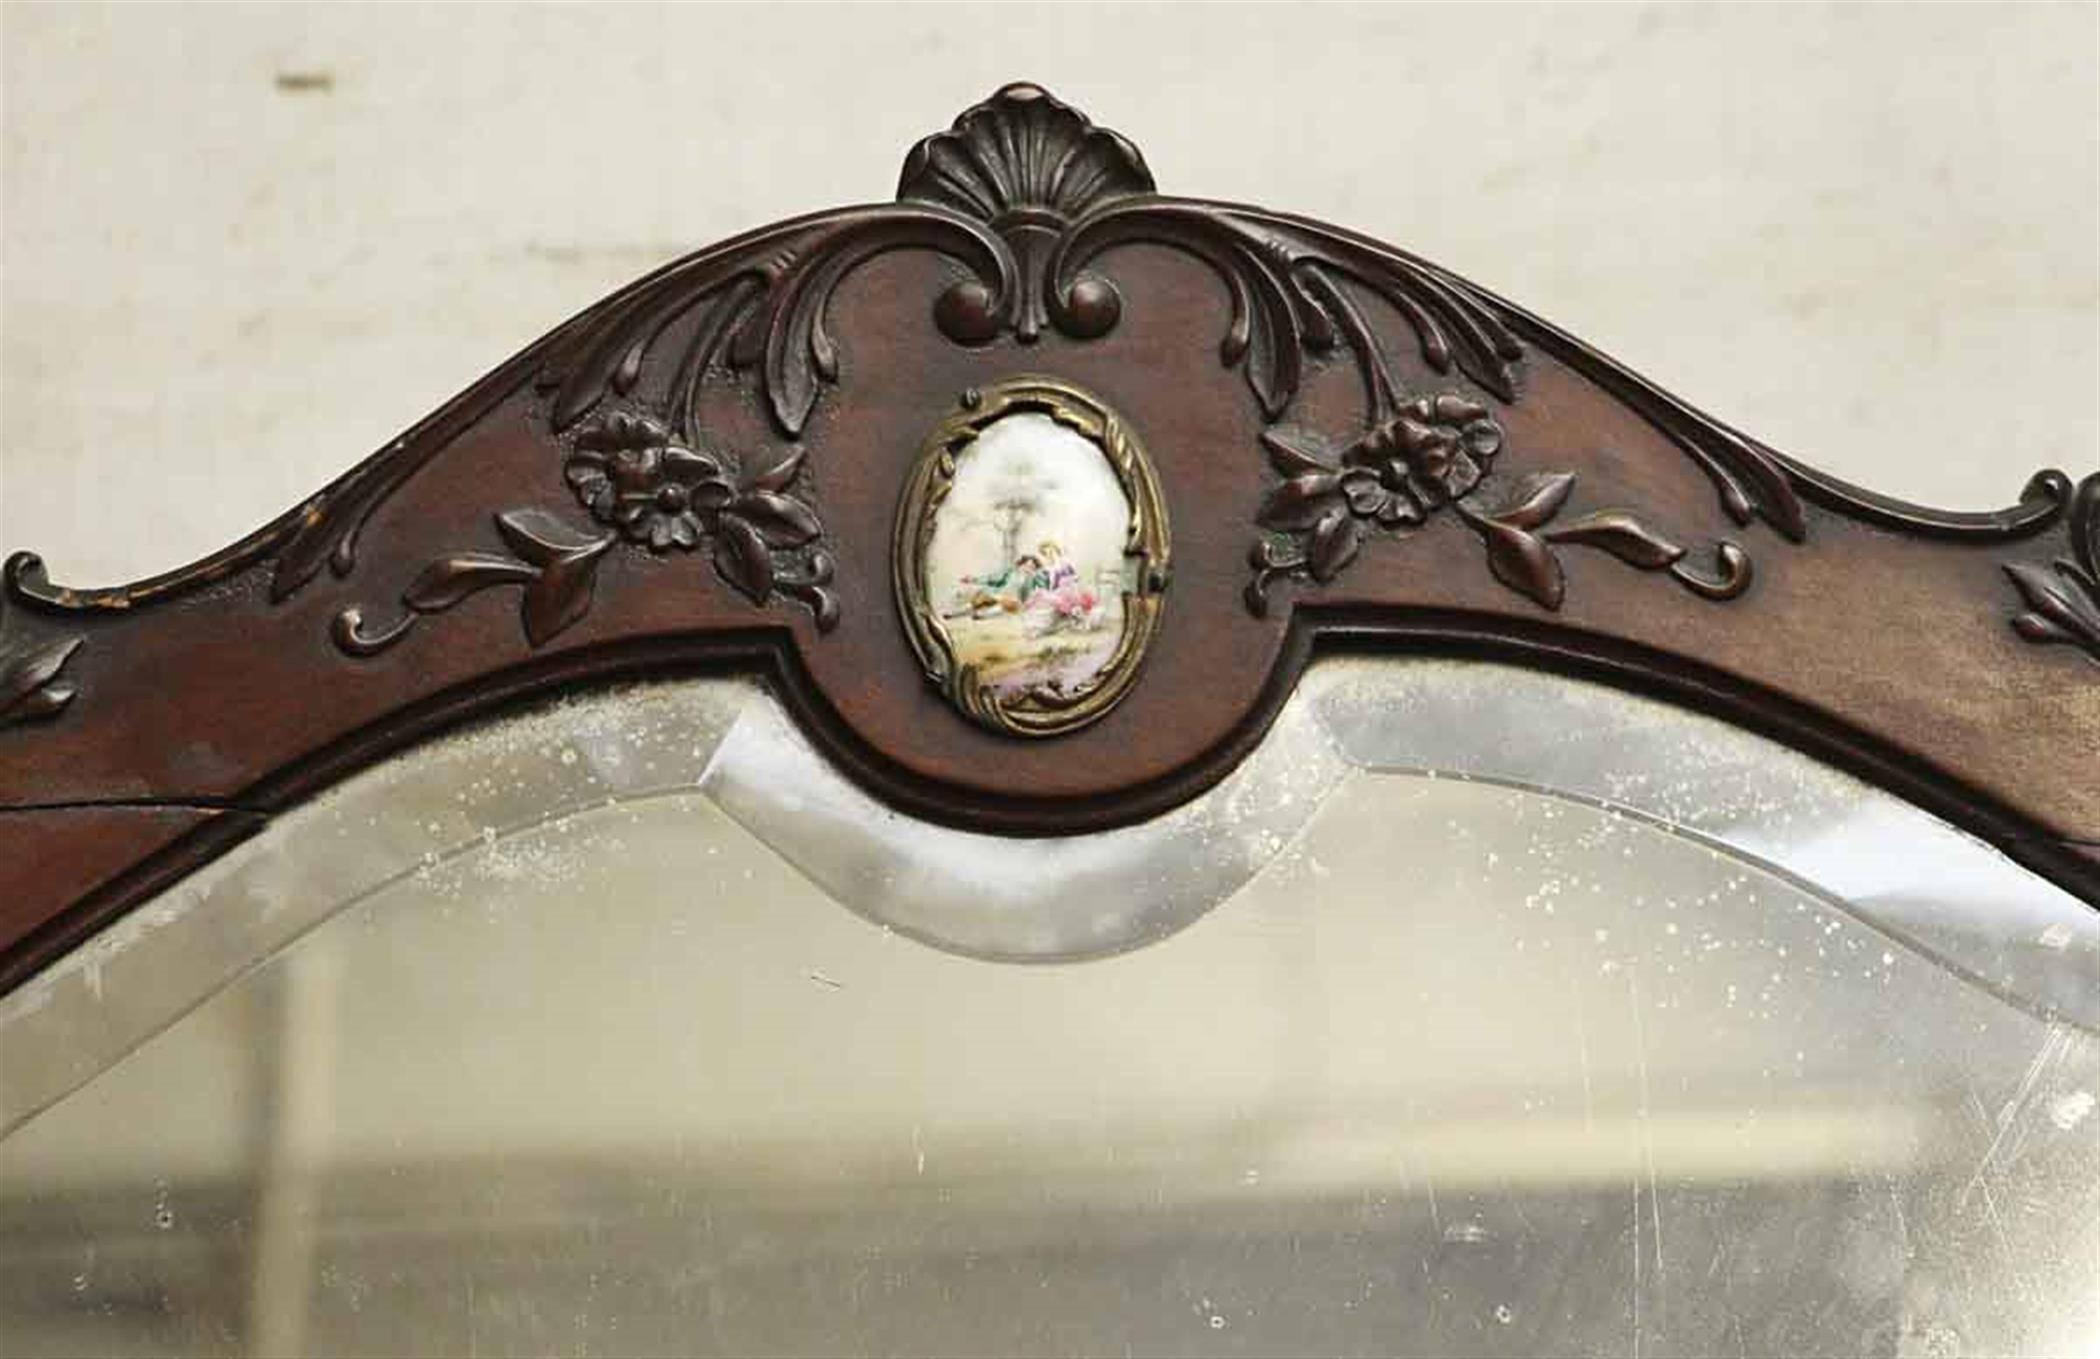 1880s beautiful Queen Anne four drawer wooden vanity with original beveled mirror and decorative figural porcelain pulls. The mirror is also adorned with a ceramic decorative detail at the top. There are two extra mini drawers on both sides at the